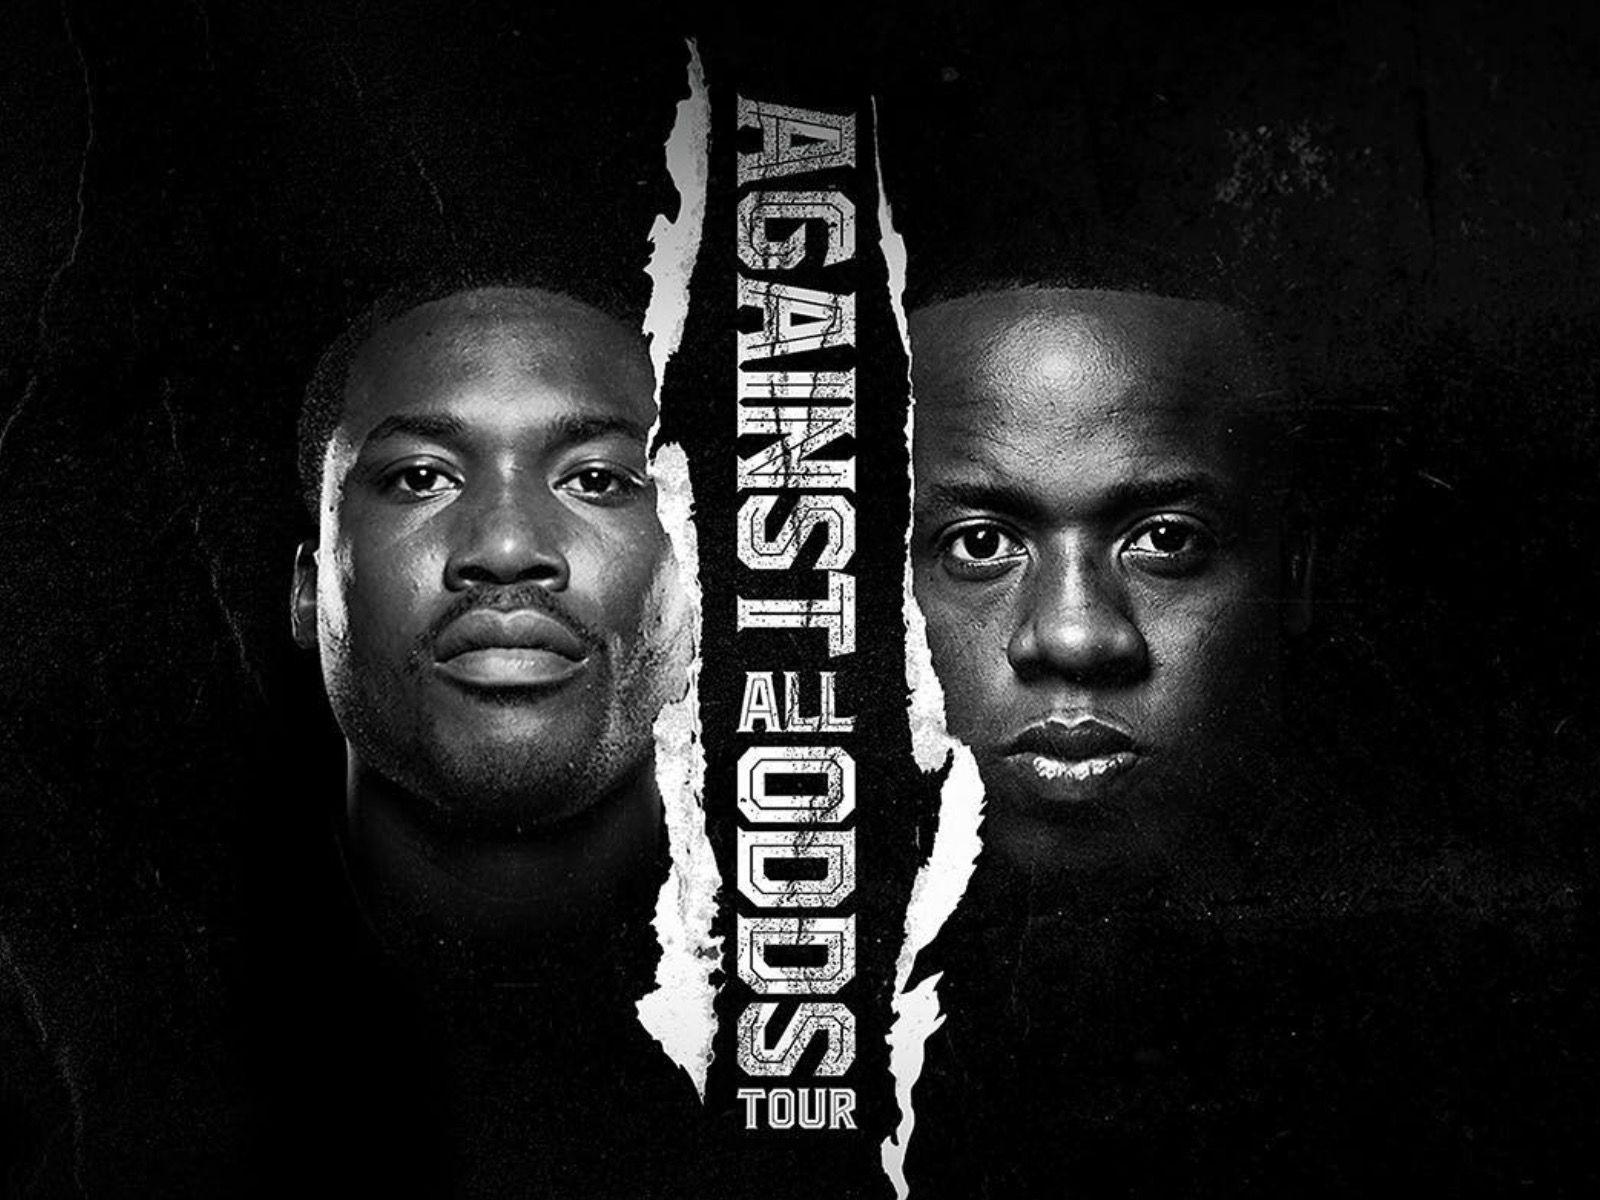 Meek Mill and Yo Gotti team up for 'Against All Odds' Tour